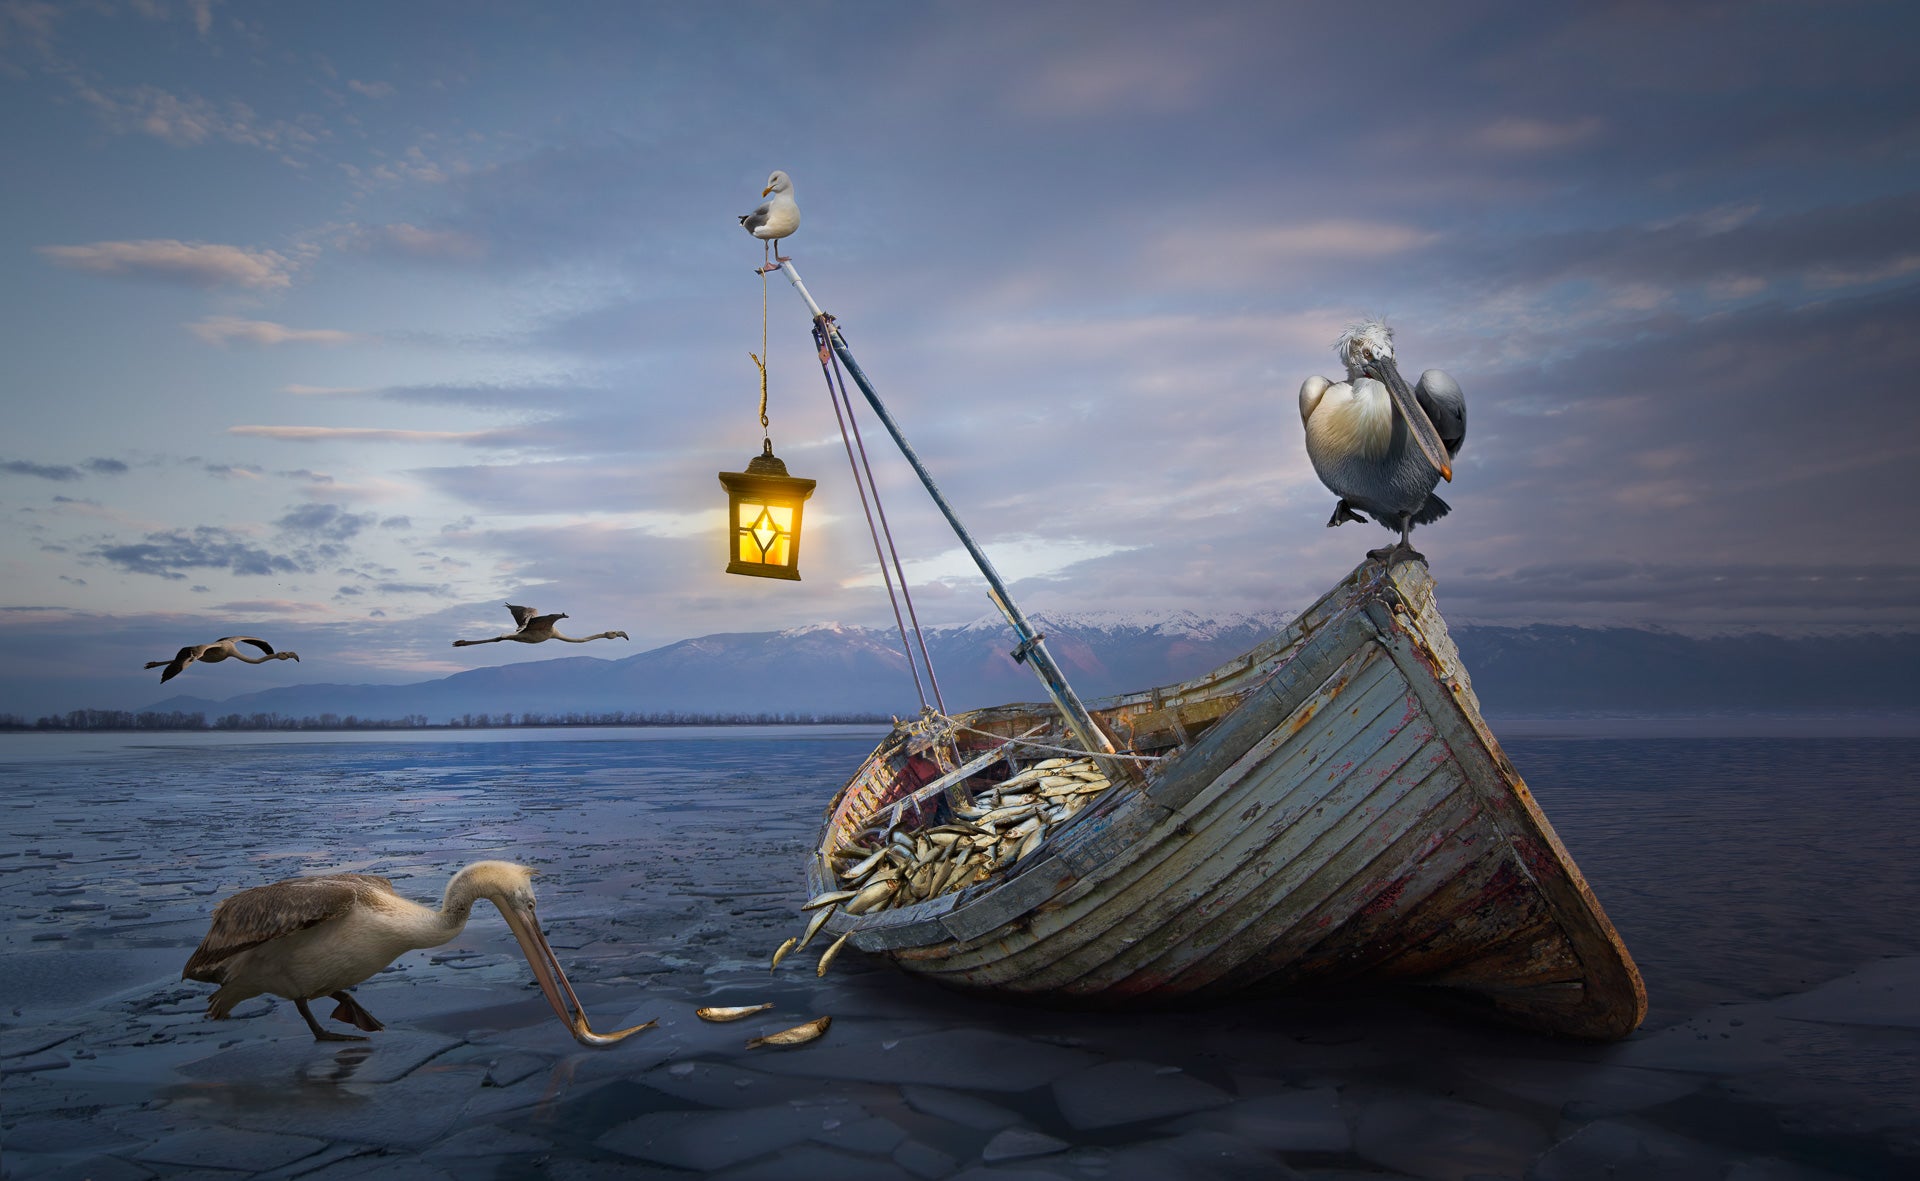 An image of pelicans, flamingos, an old boat and fish stitched together by the photographer. (Photo: Janine Lee)